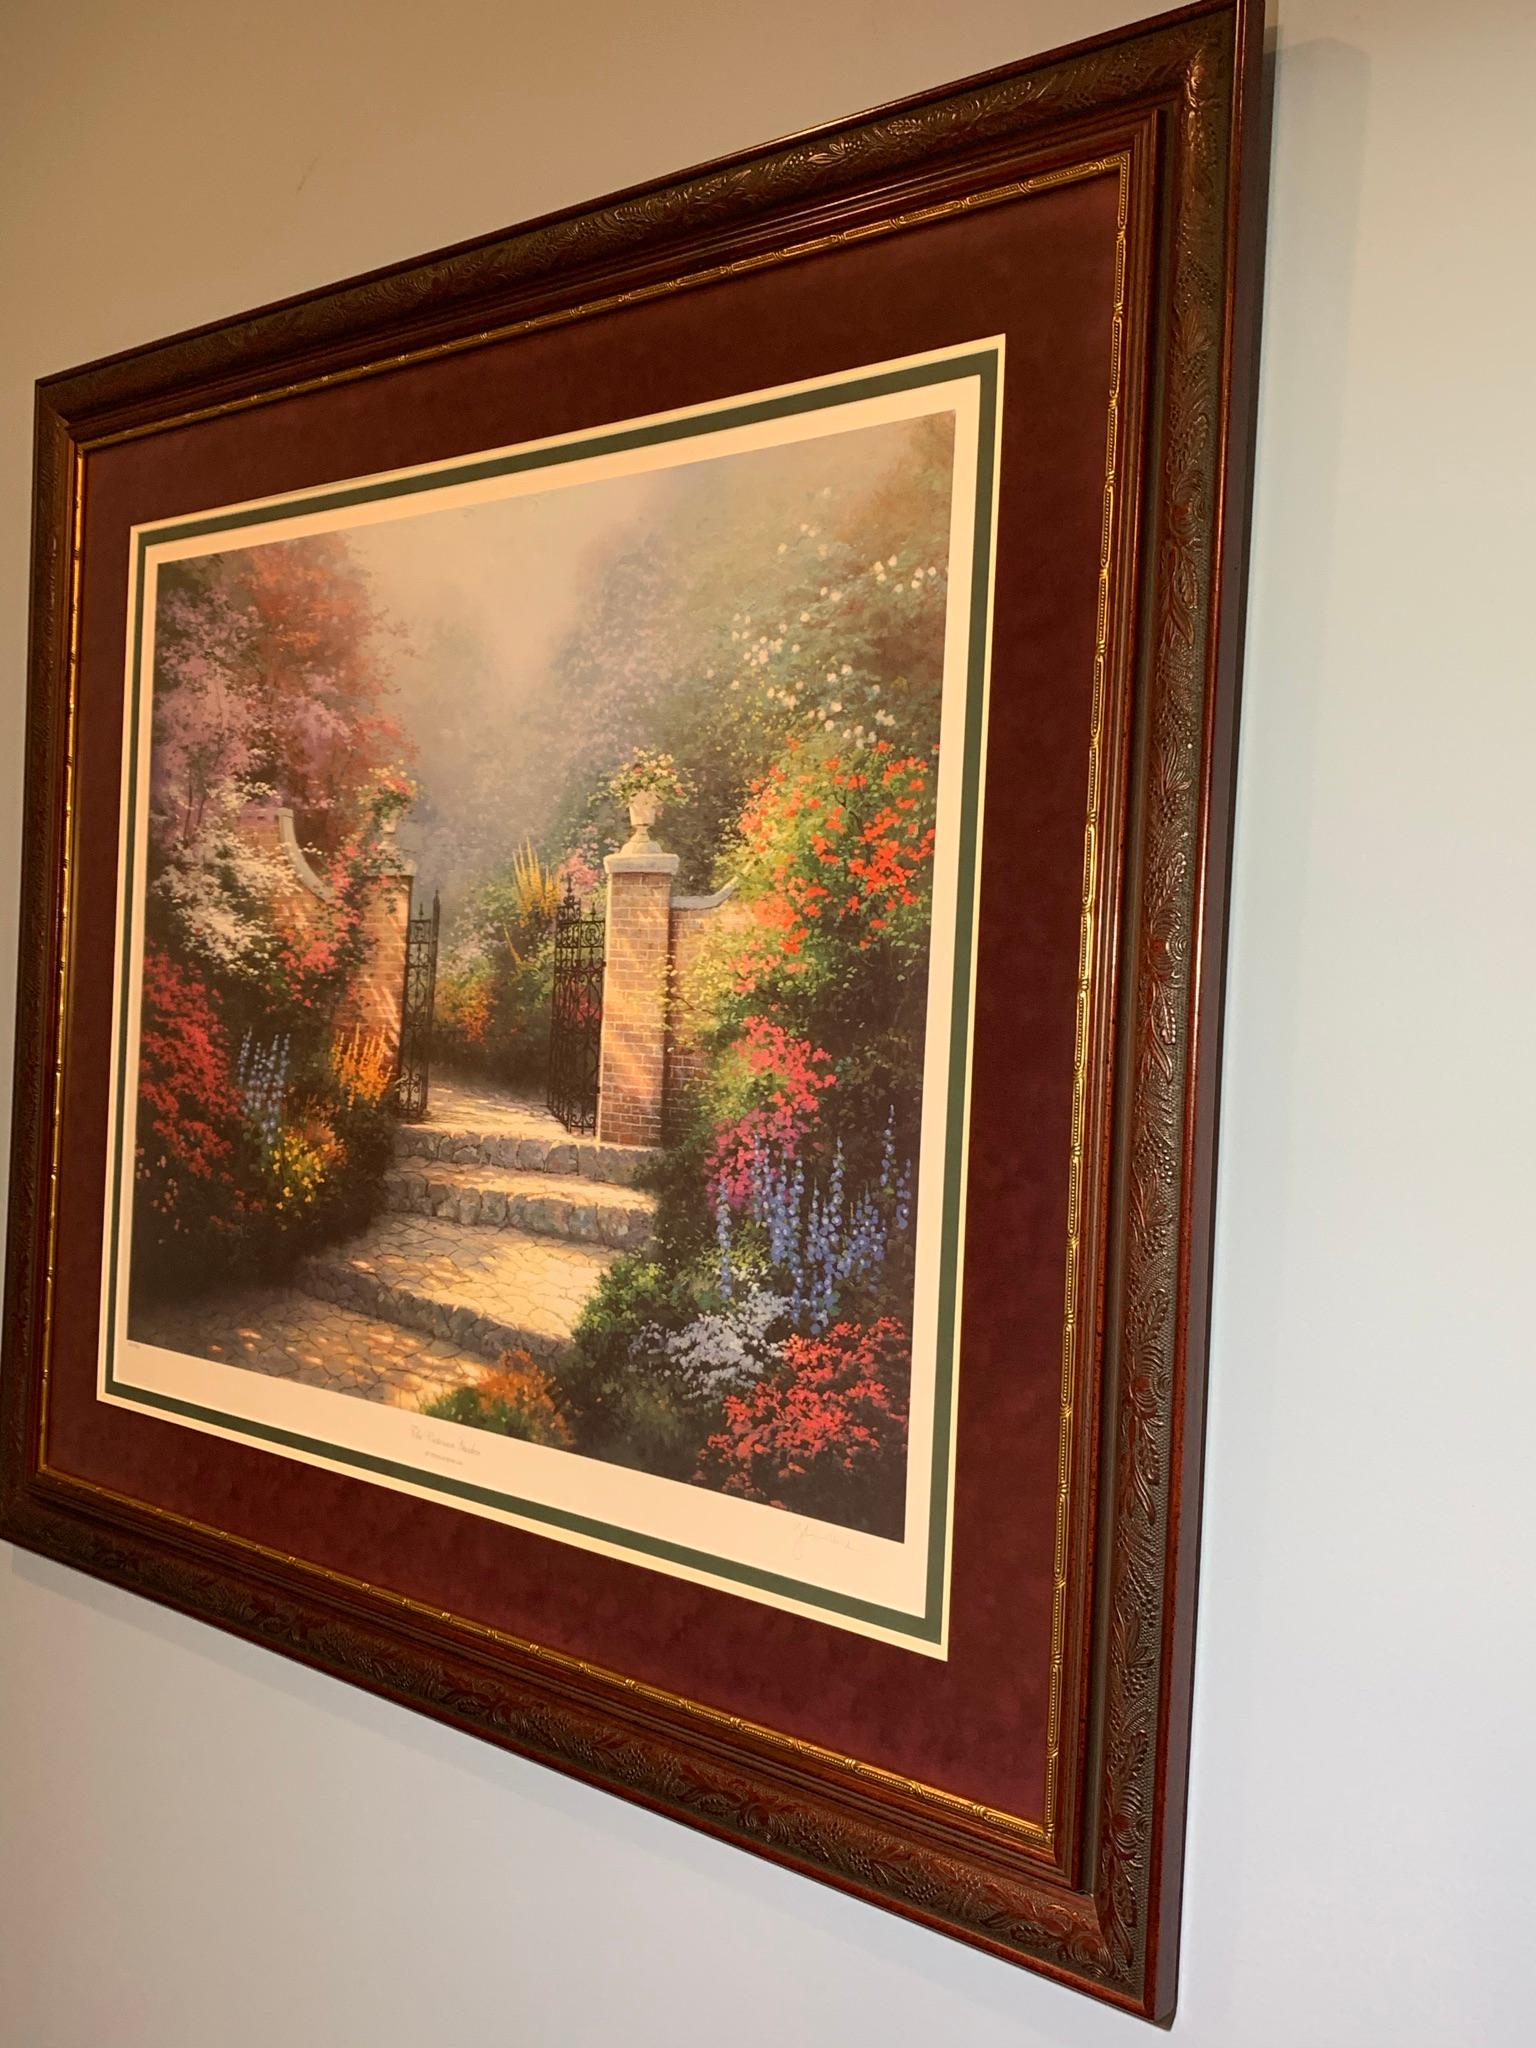 Limited Edition S/N Print on Canvas The Victorian Garden by Thomas Kinkade.